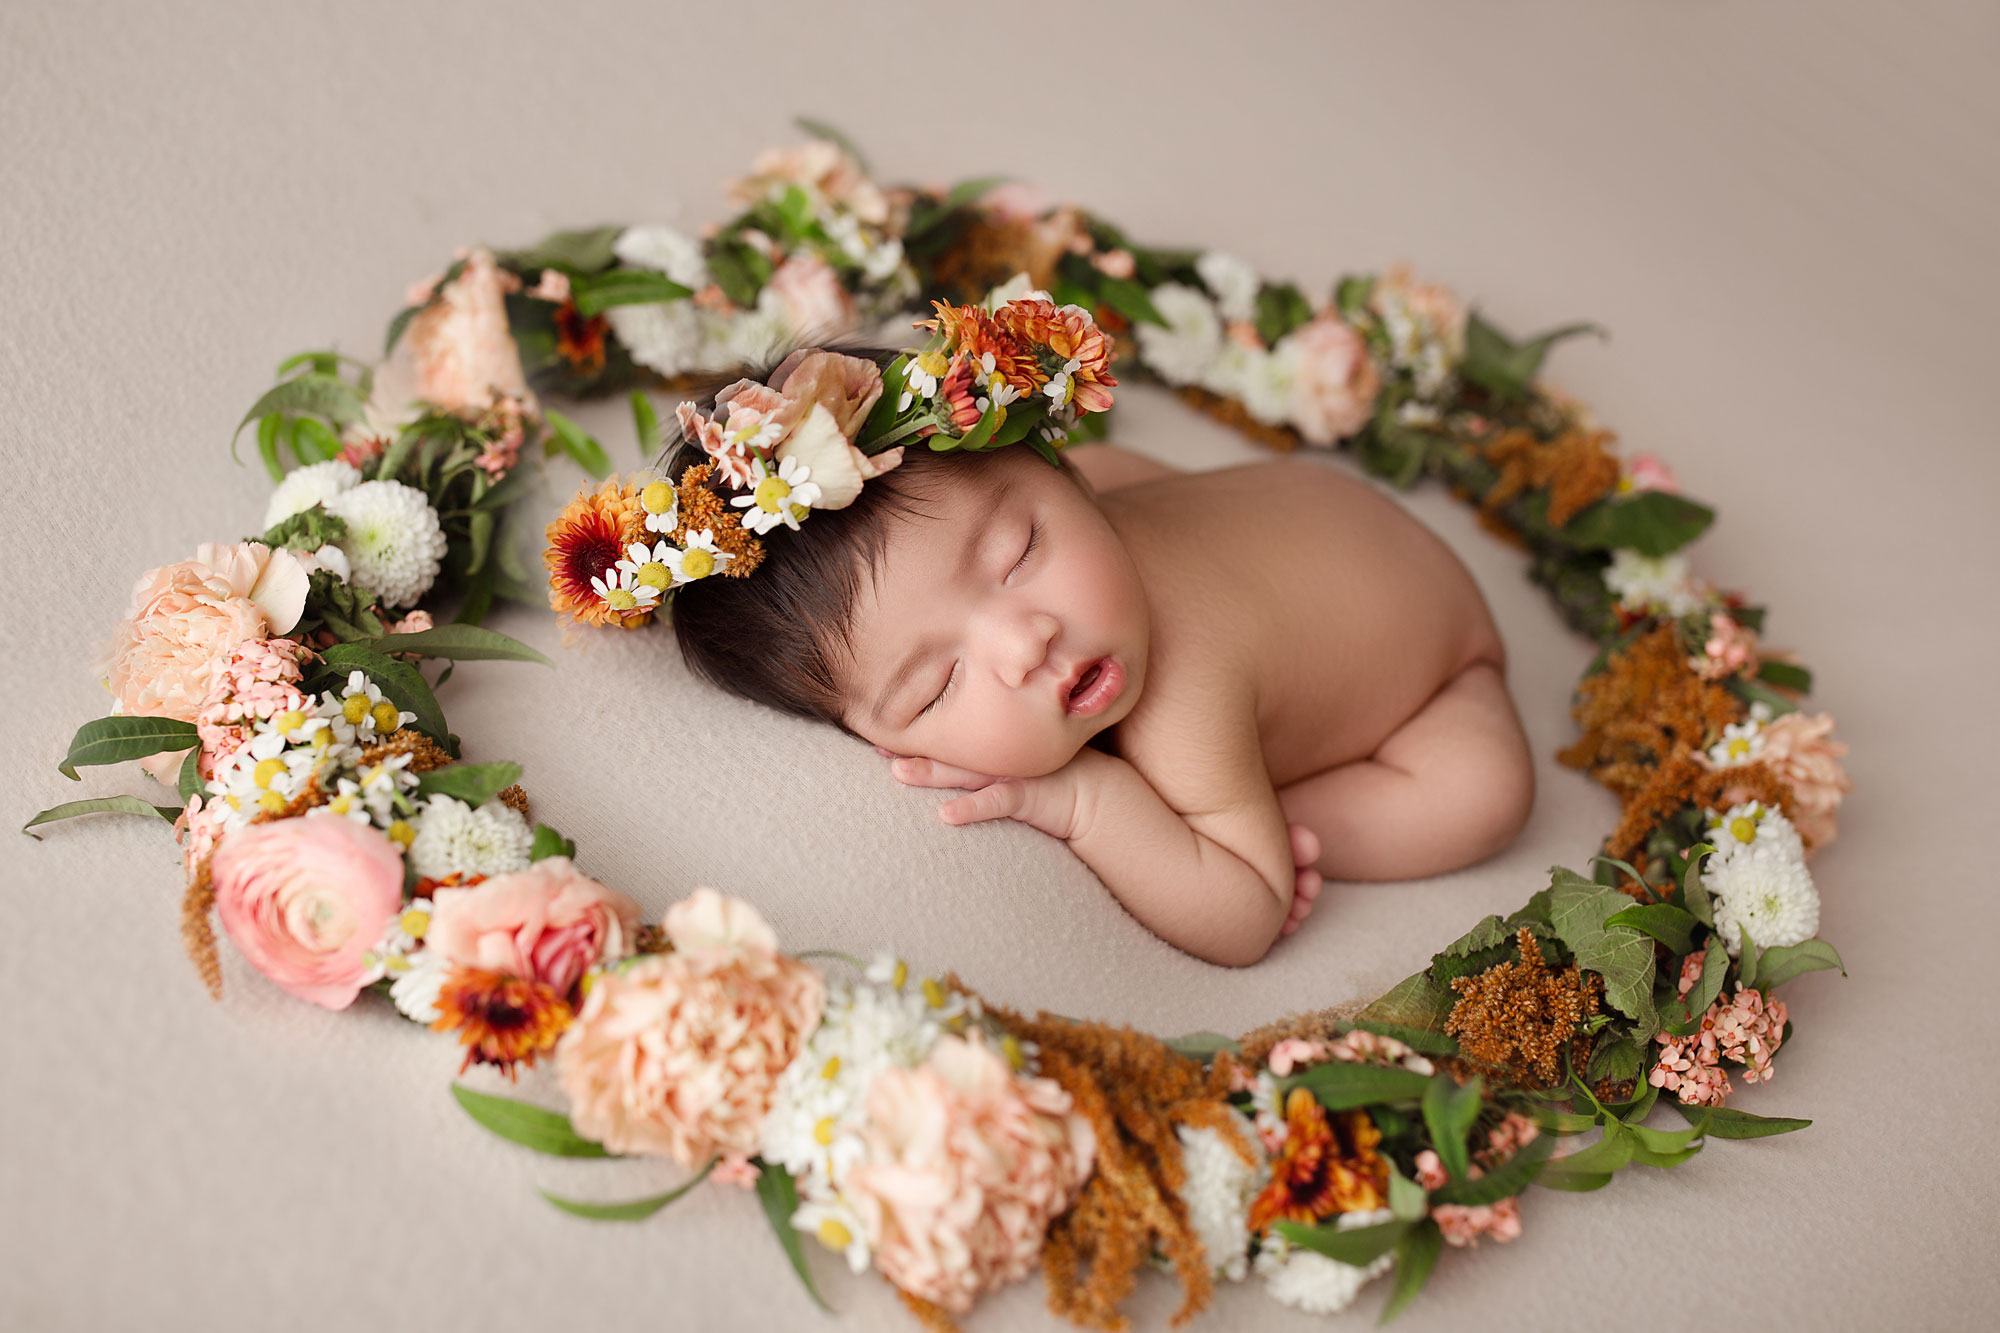 baby girl sleeping on a blanket surrounded by fresh flowers